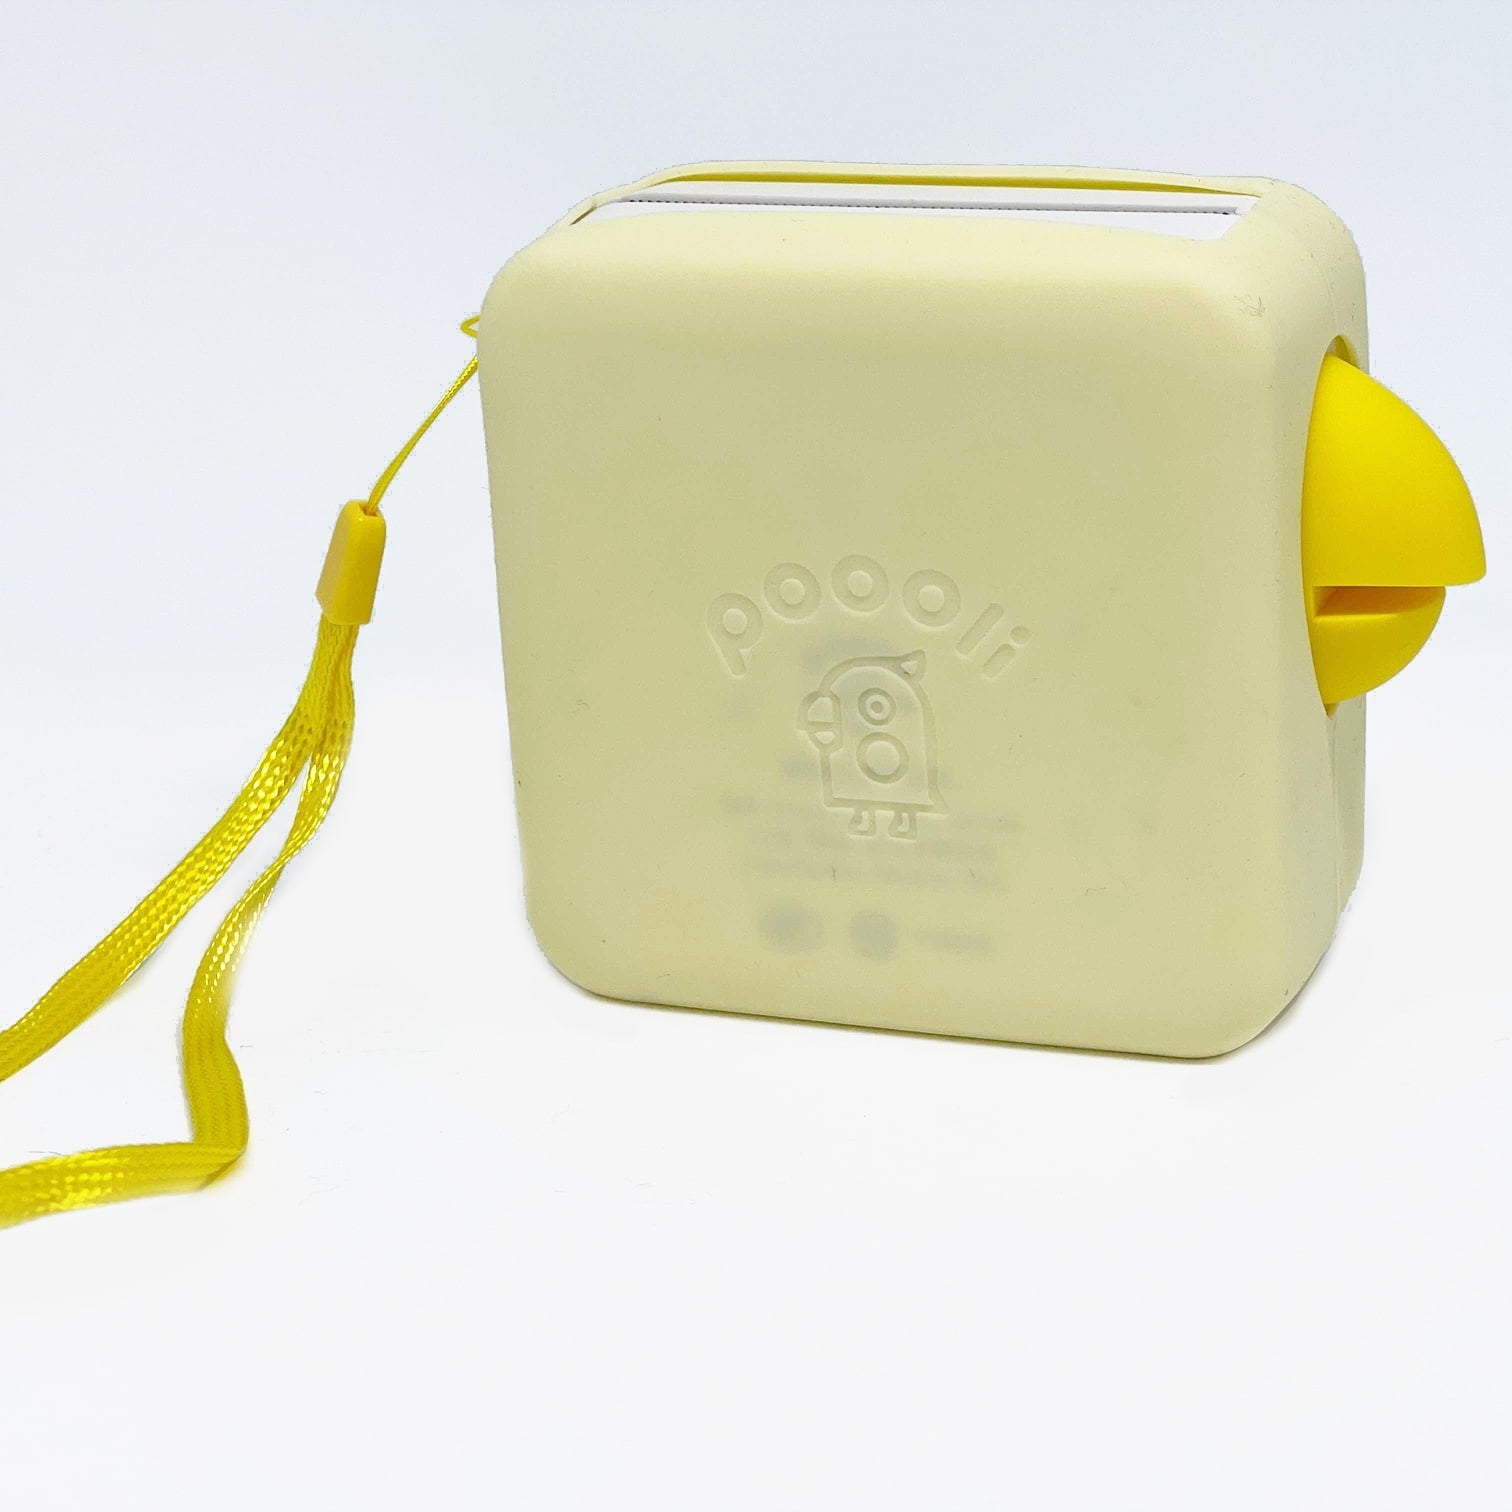 PoooliProtect Colored Soft Bumper Back yellow